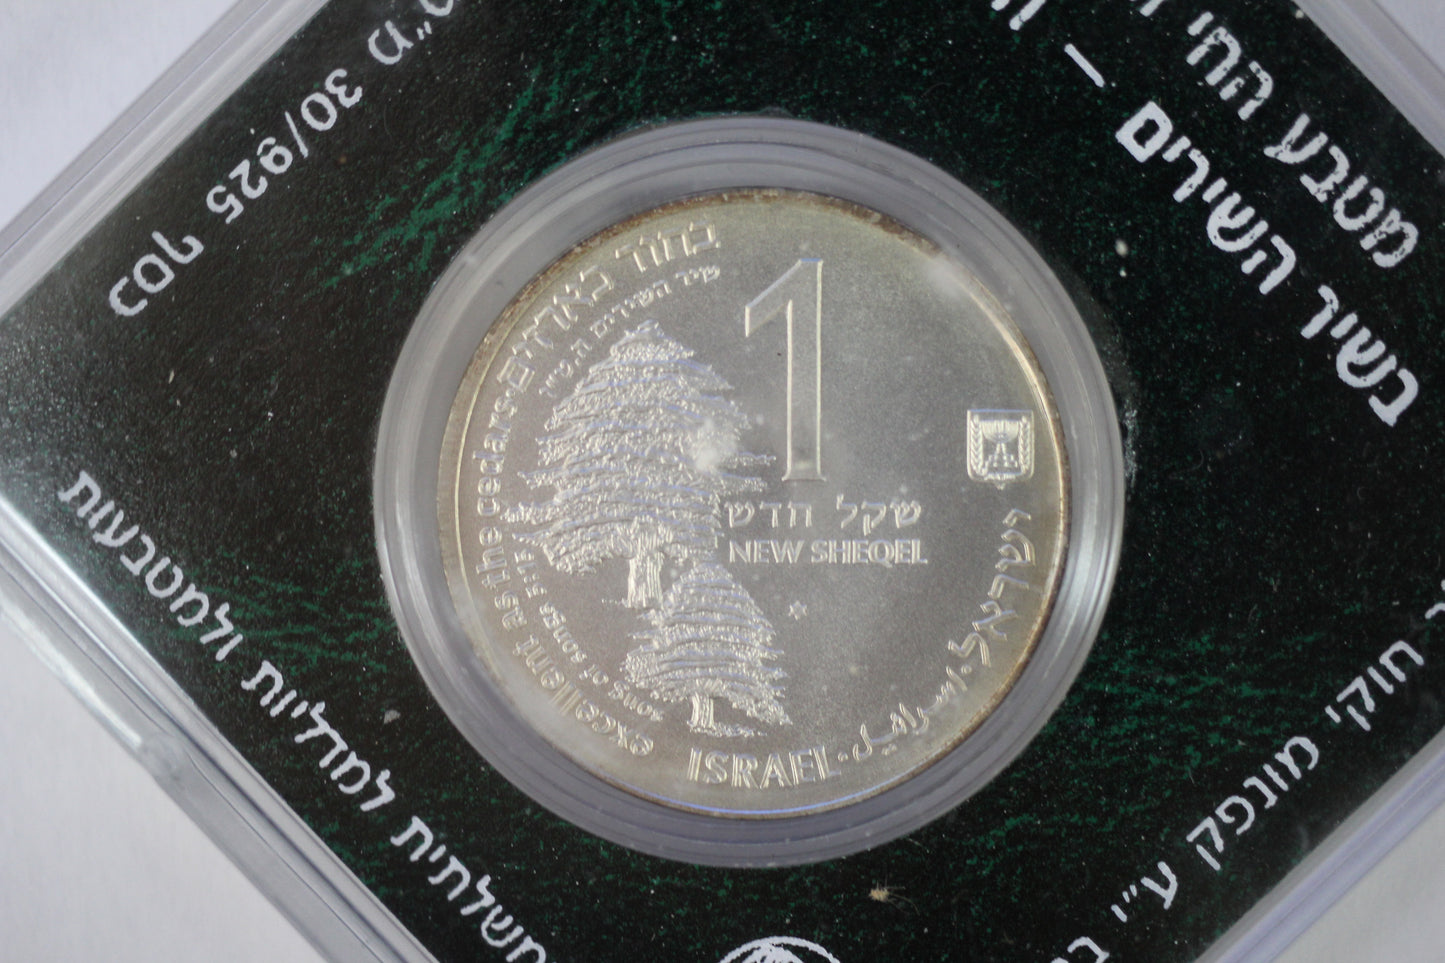 1991 Israel Holy Land Wildlife Dove Sterling Silver BU Coin in OGP